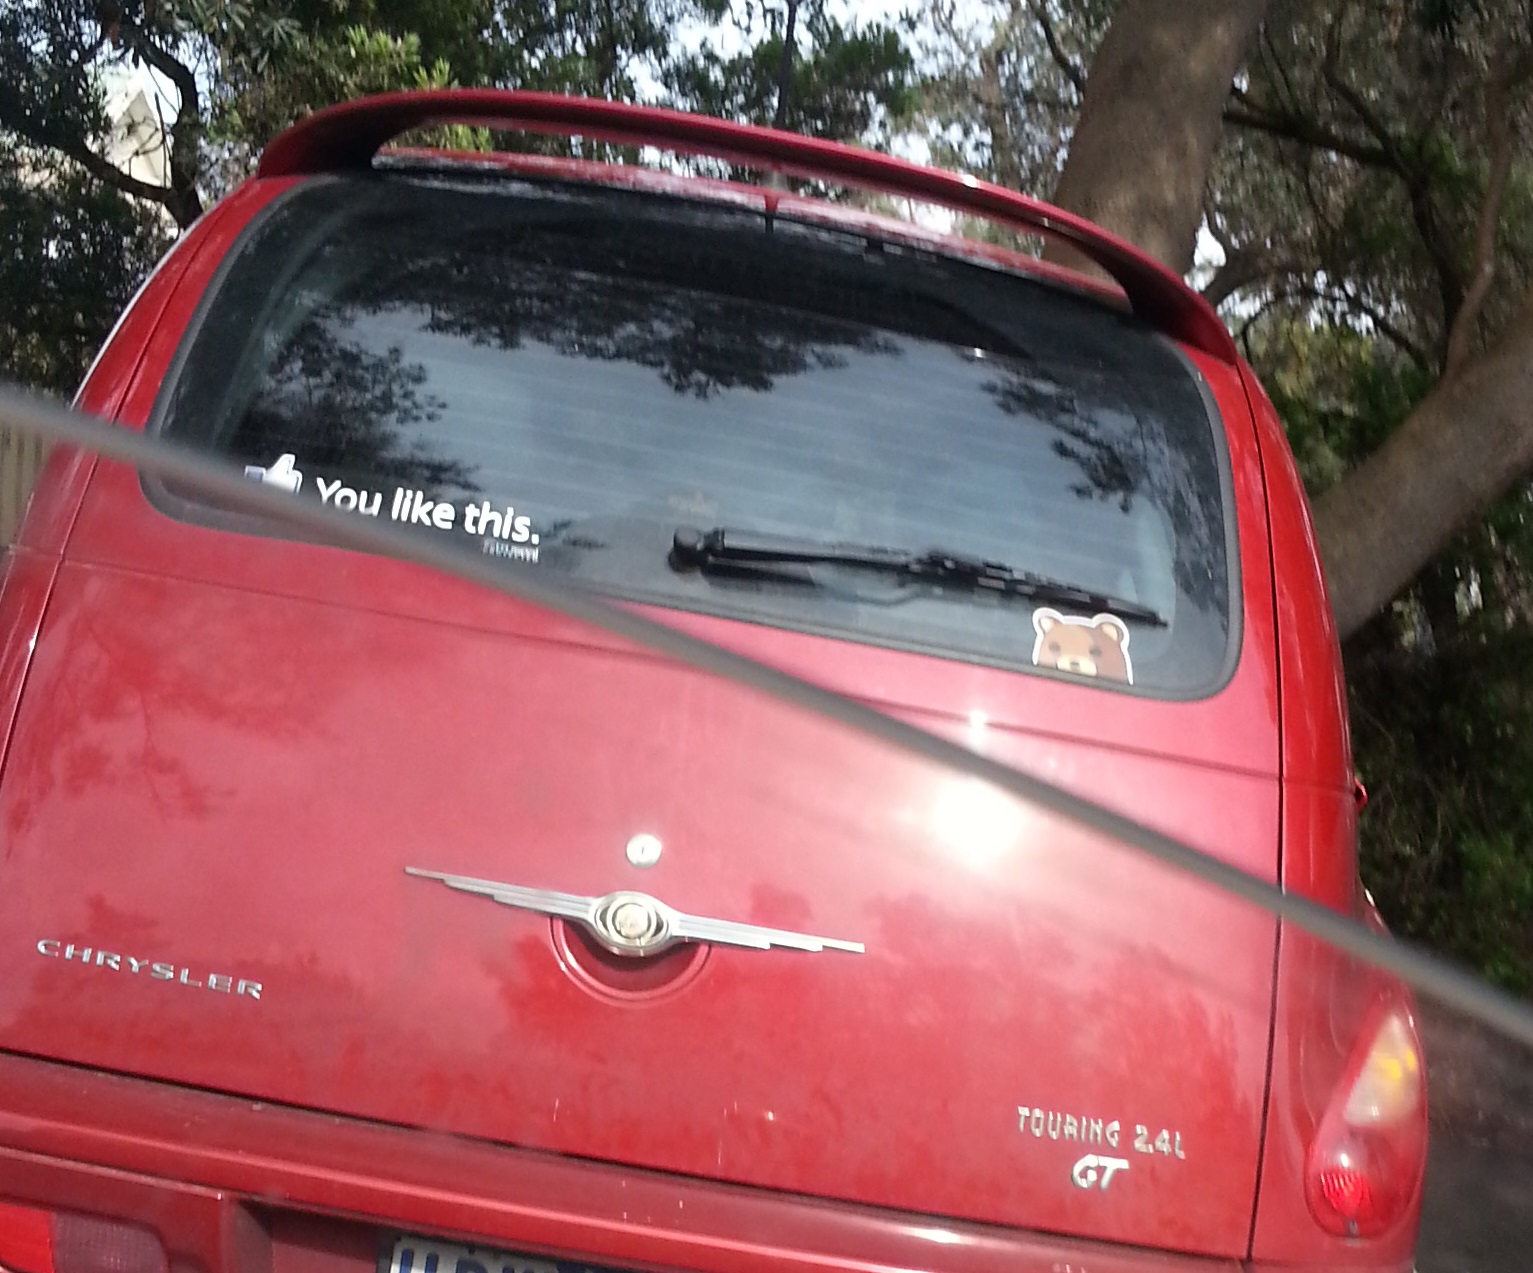 Saw this car outside a school...I should alert someone